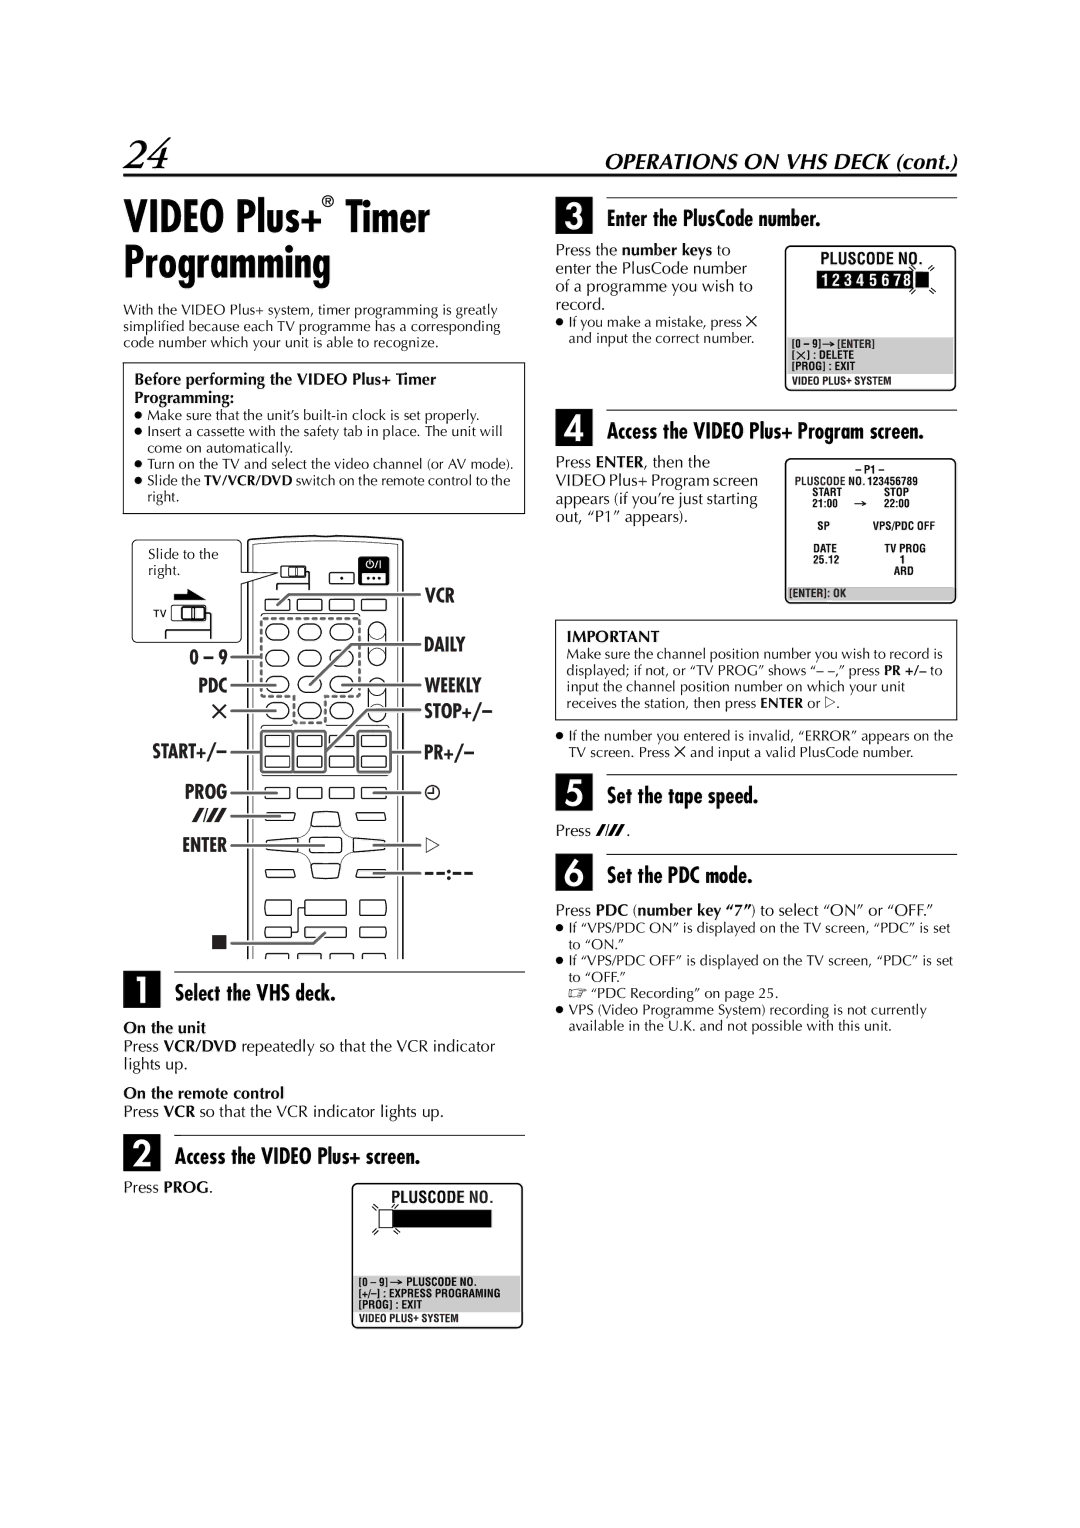 JVC LPT0991-001A manual Access the Video Plus+ screen Enter the PlusCode number, Set the PDC mode 